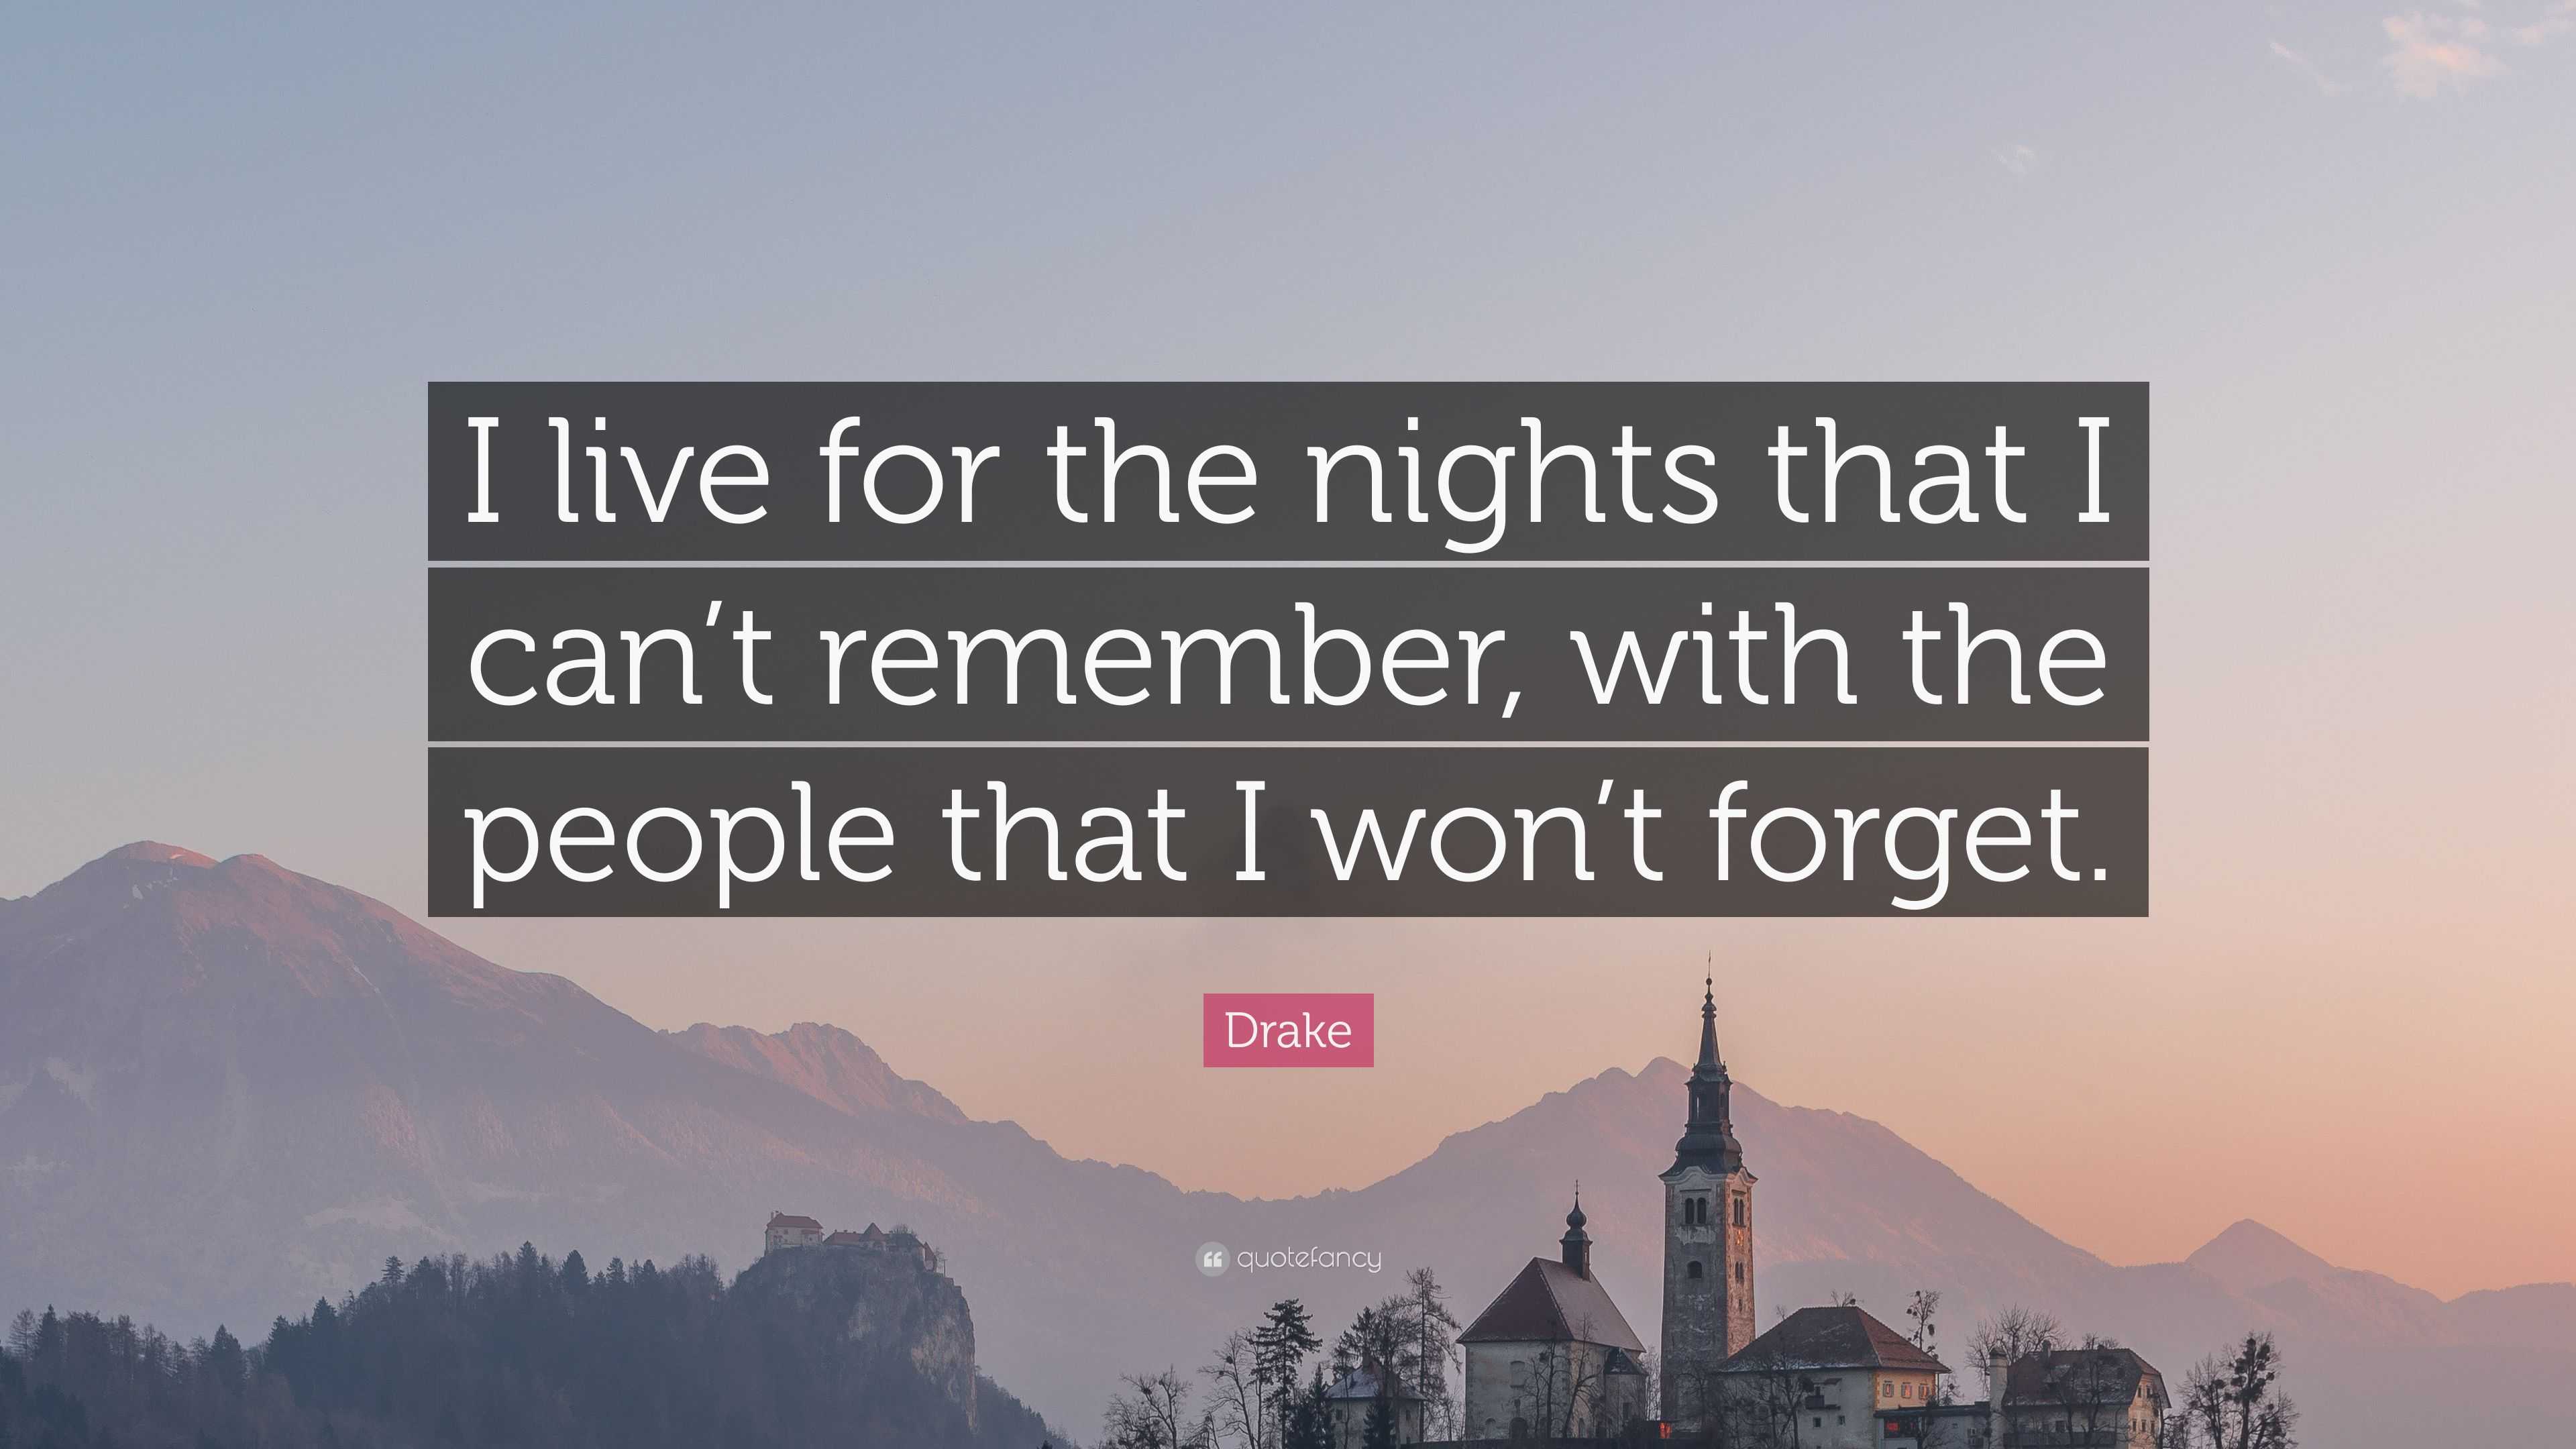 Drake Quote: “I live for the nights that I can’t remember, with the